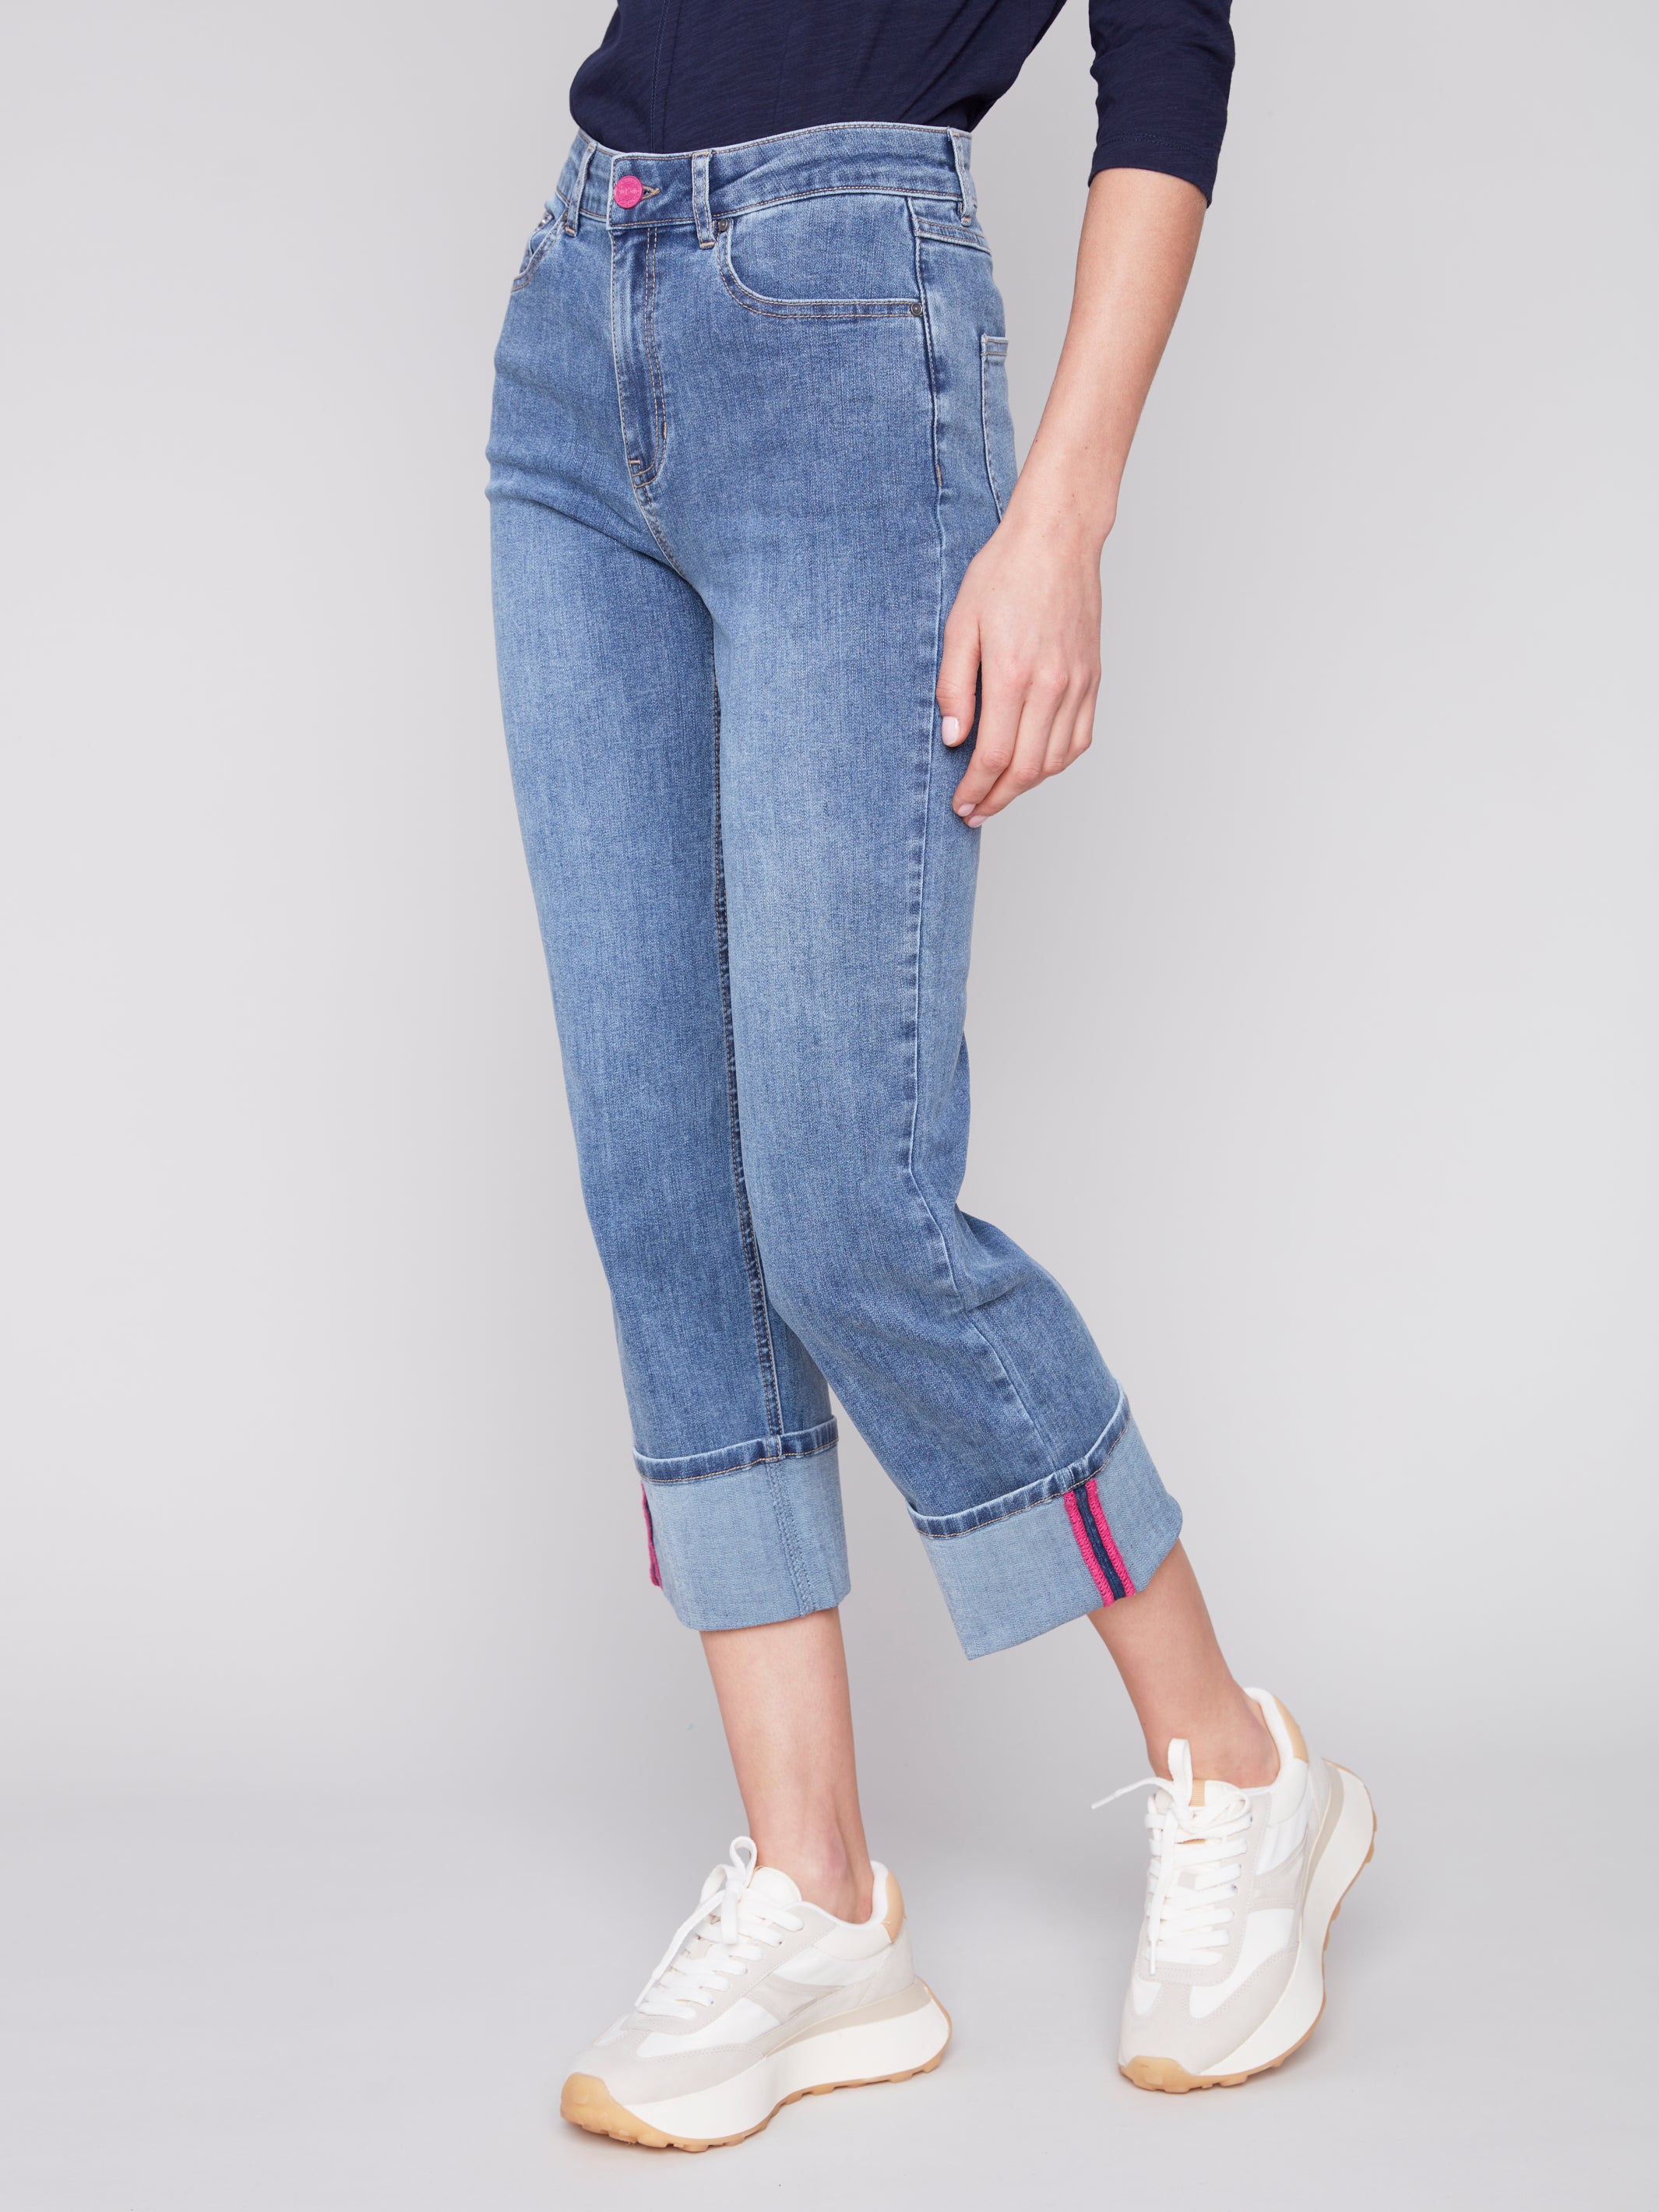 Straight Leg Jeans with Folded Cuff by Charlie B